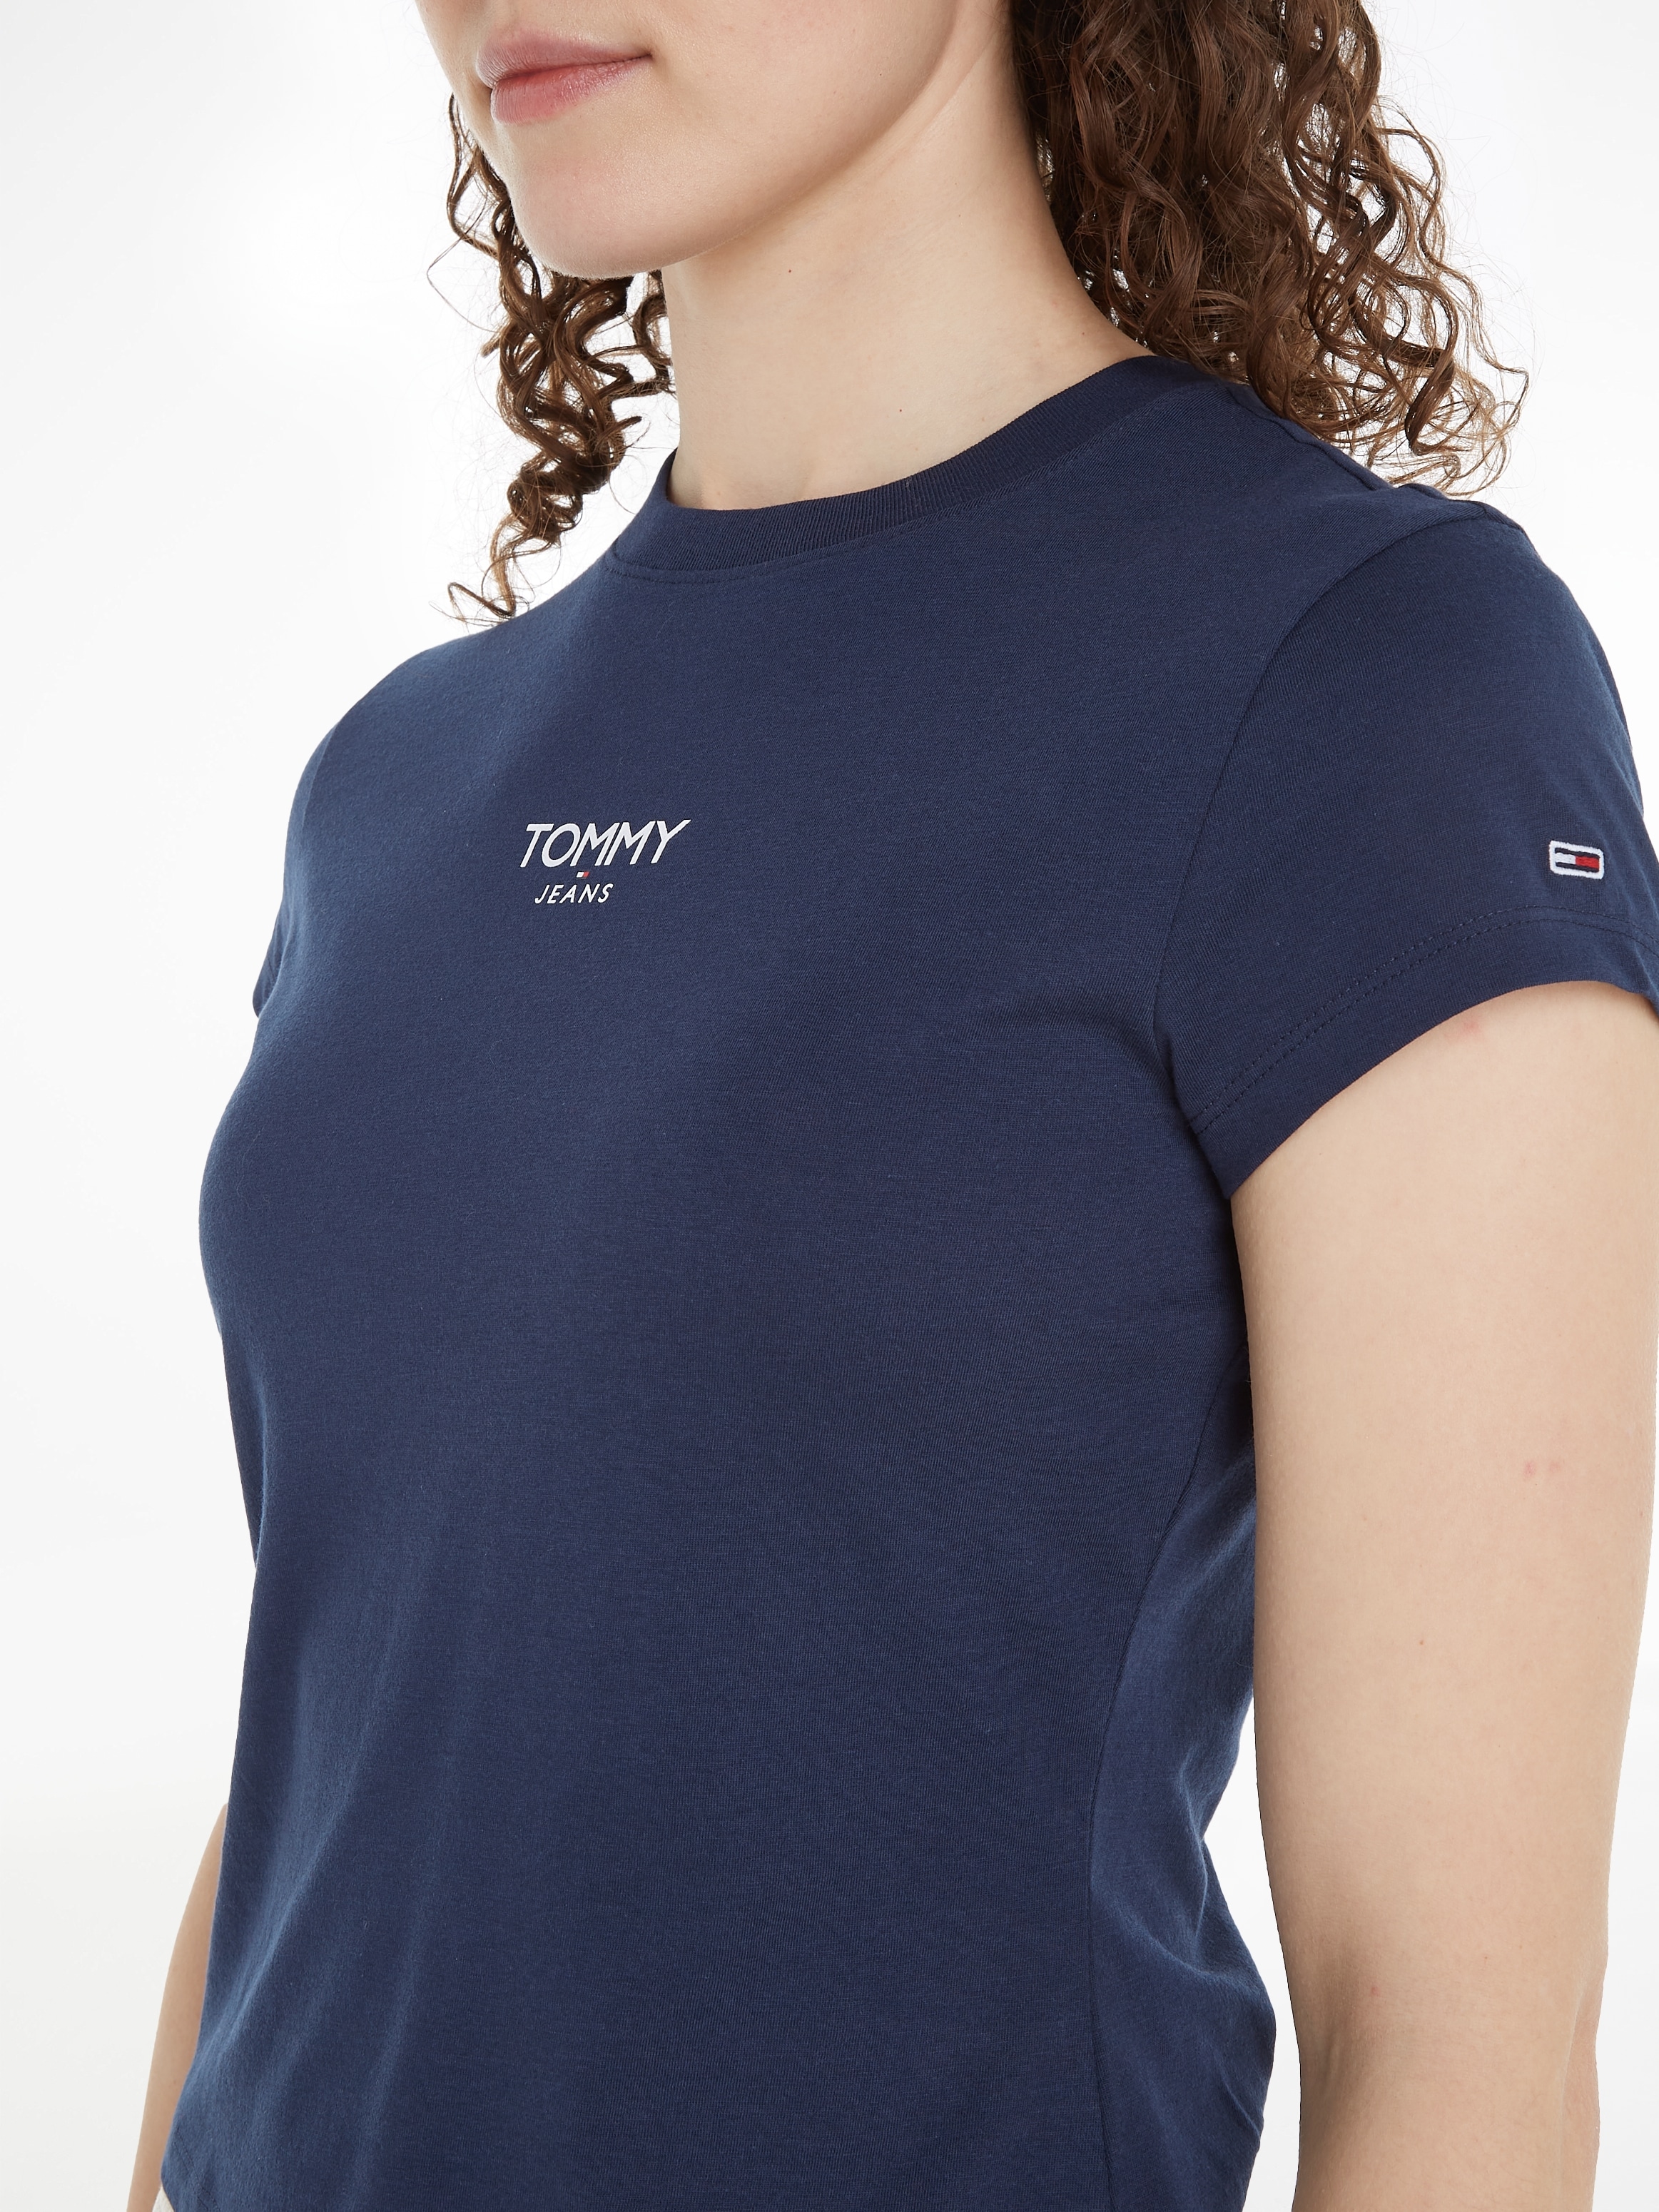 SS«, Tommy LOGO Jeans walking »TJW I\'m Logo Tommy 1 Jeans T-Shirt mit | ESSENTIAL online BBY